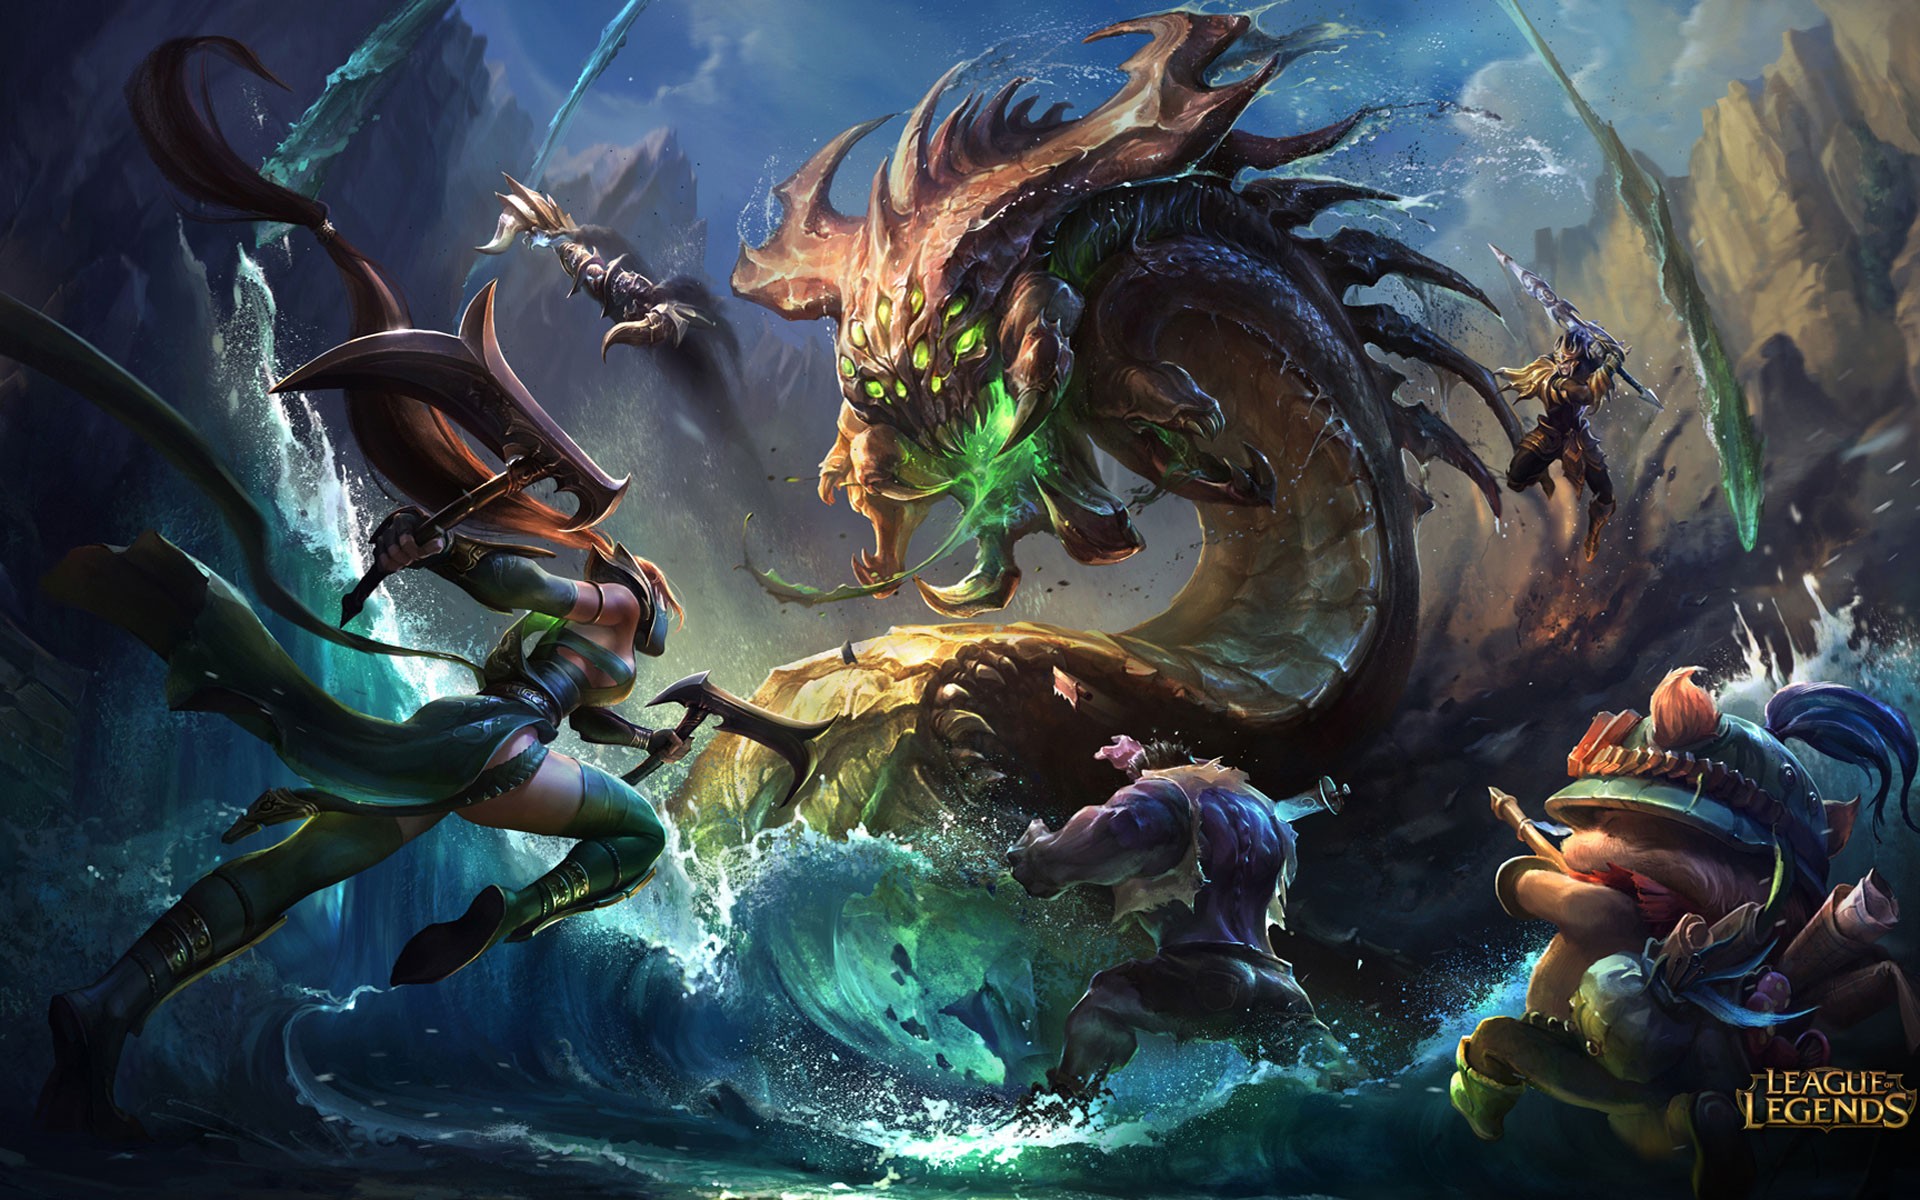 League Of Legends, Video Games, RPG, Teemo, Akali, Dr. Mundo Wallpapers